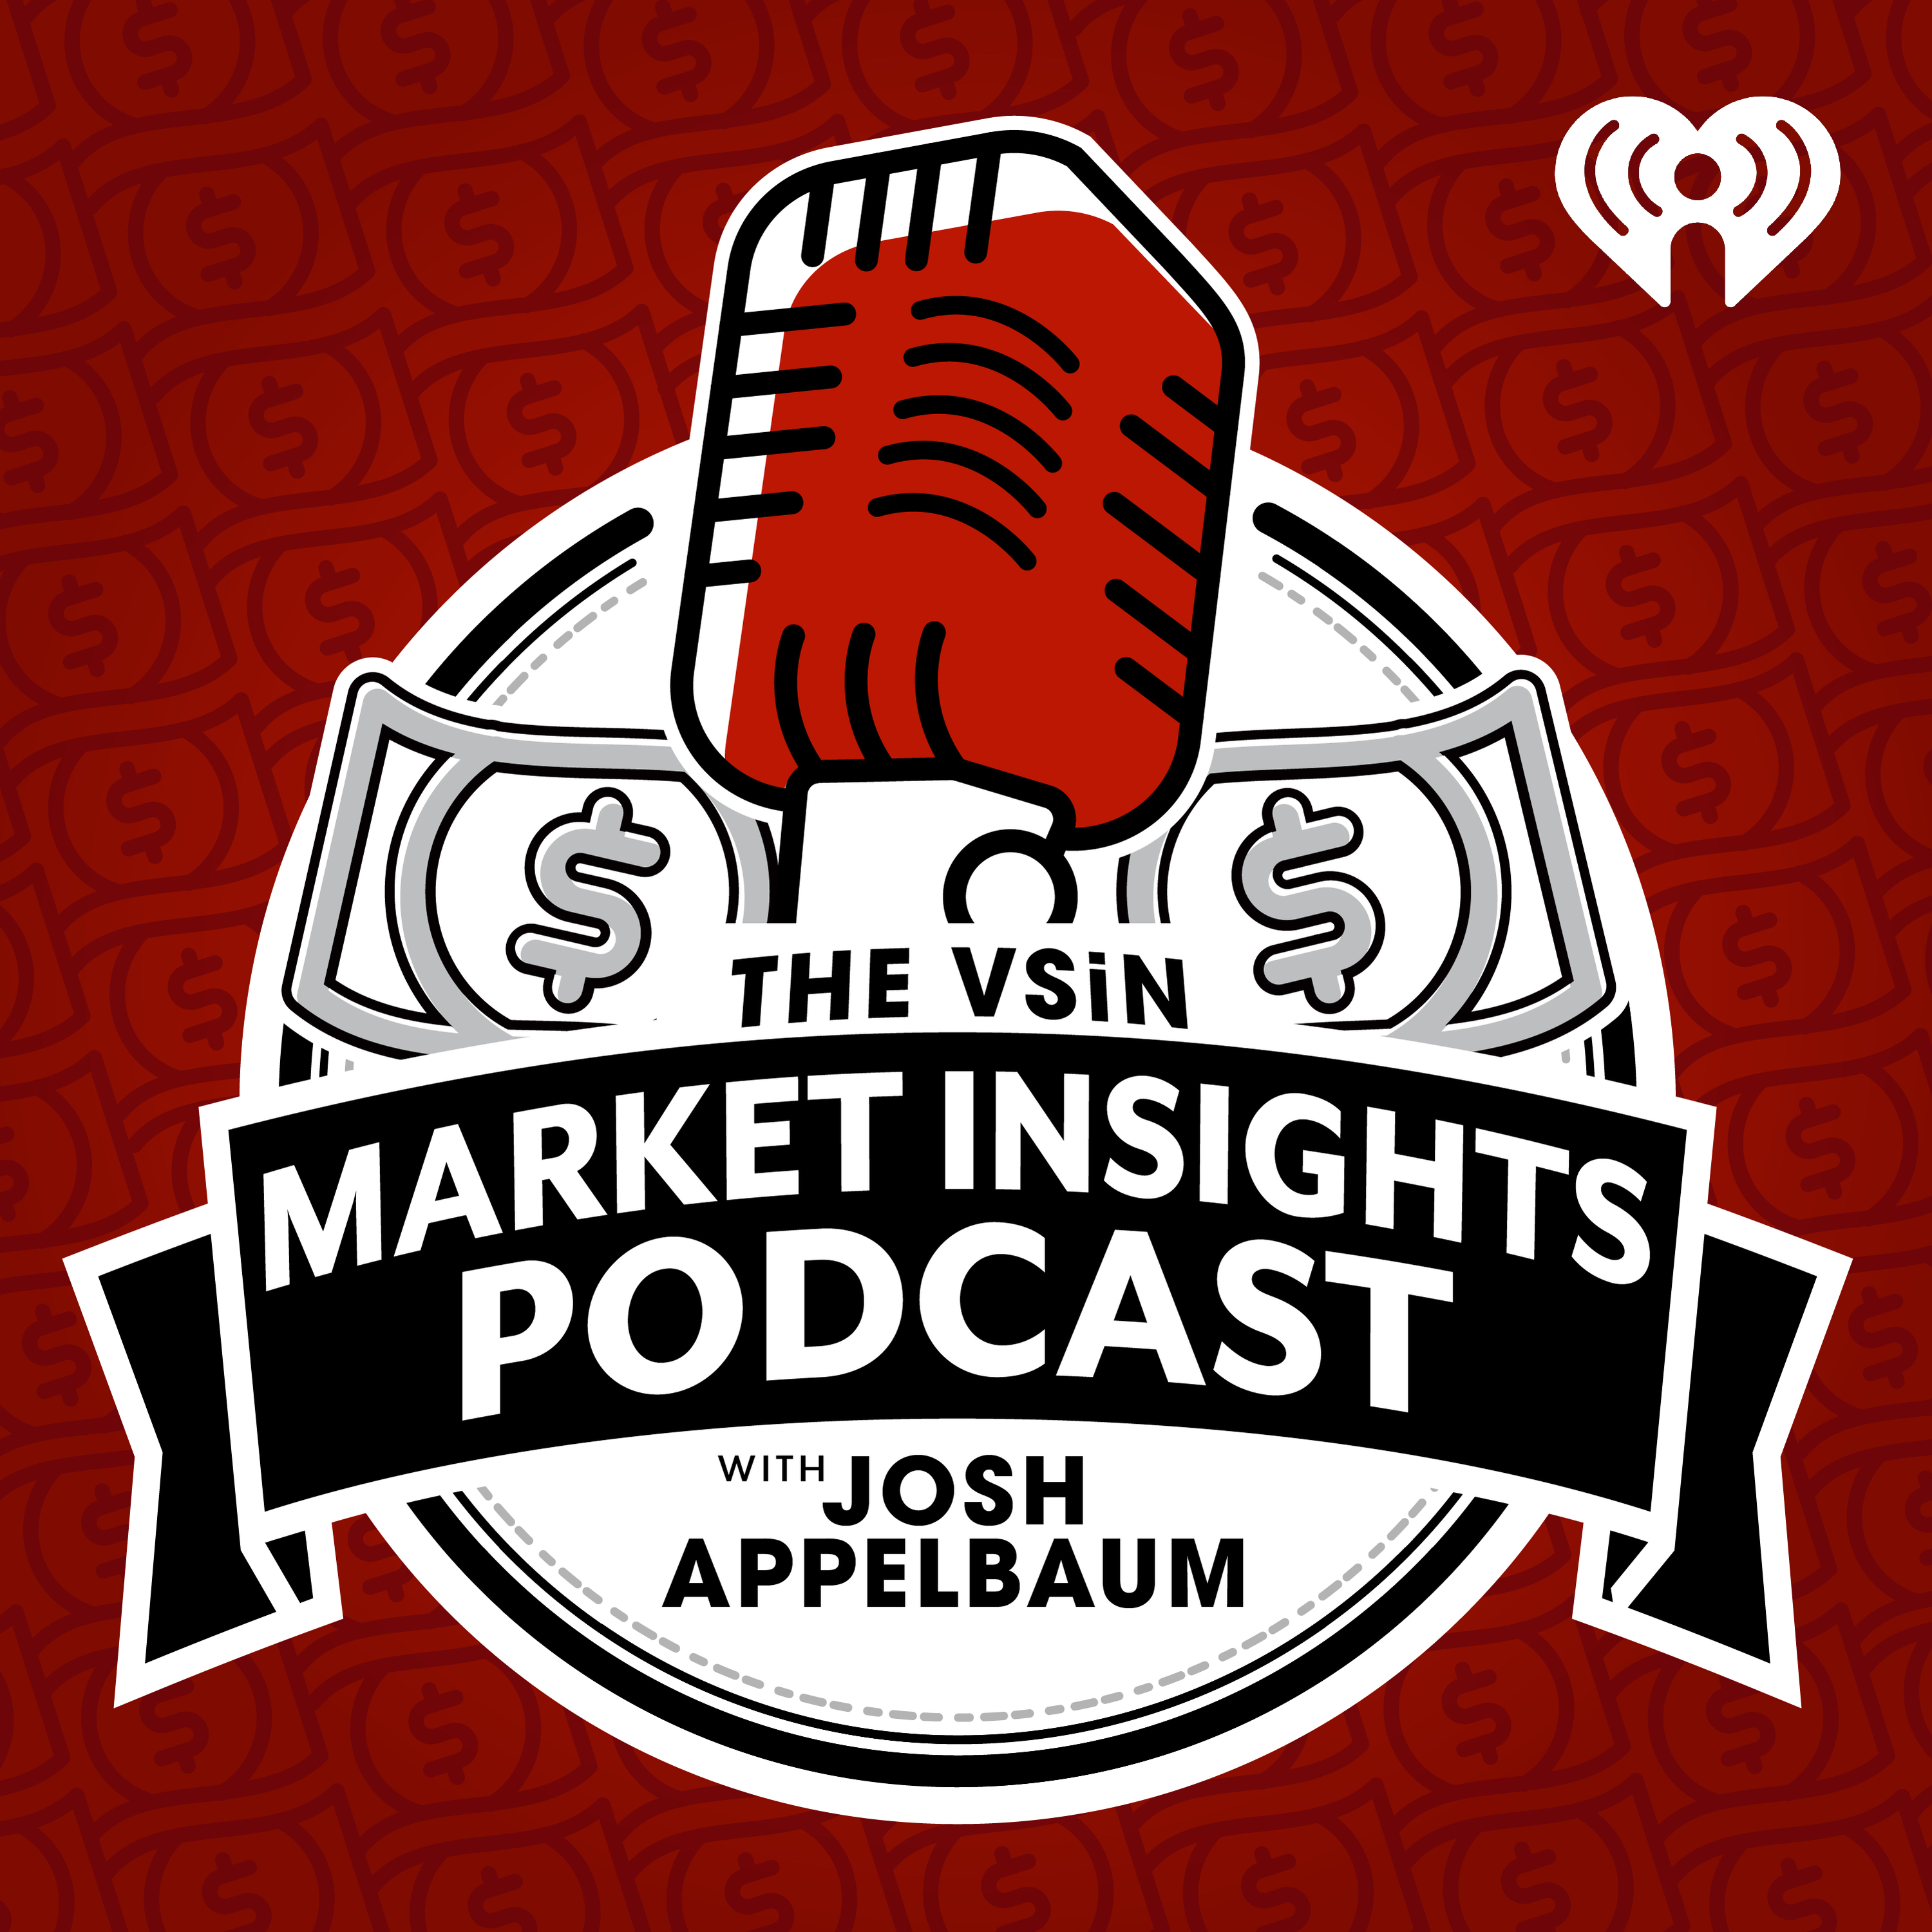 The VSiN Market Insights Podcast with Josh Appelbaum | March 14, 2022